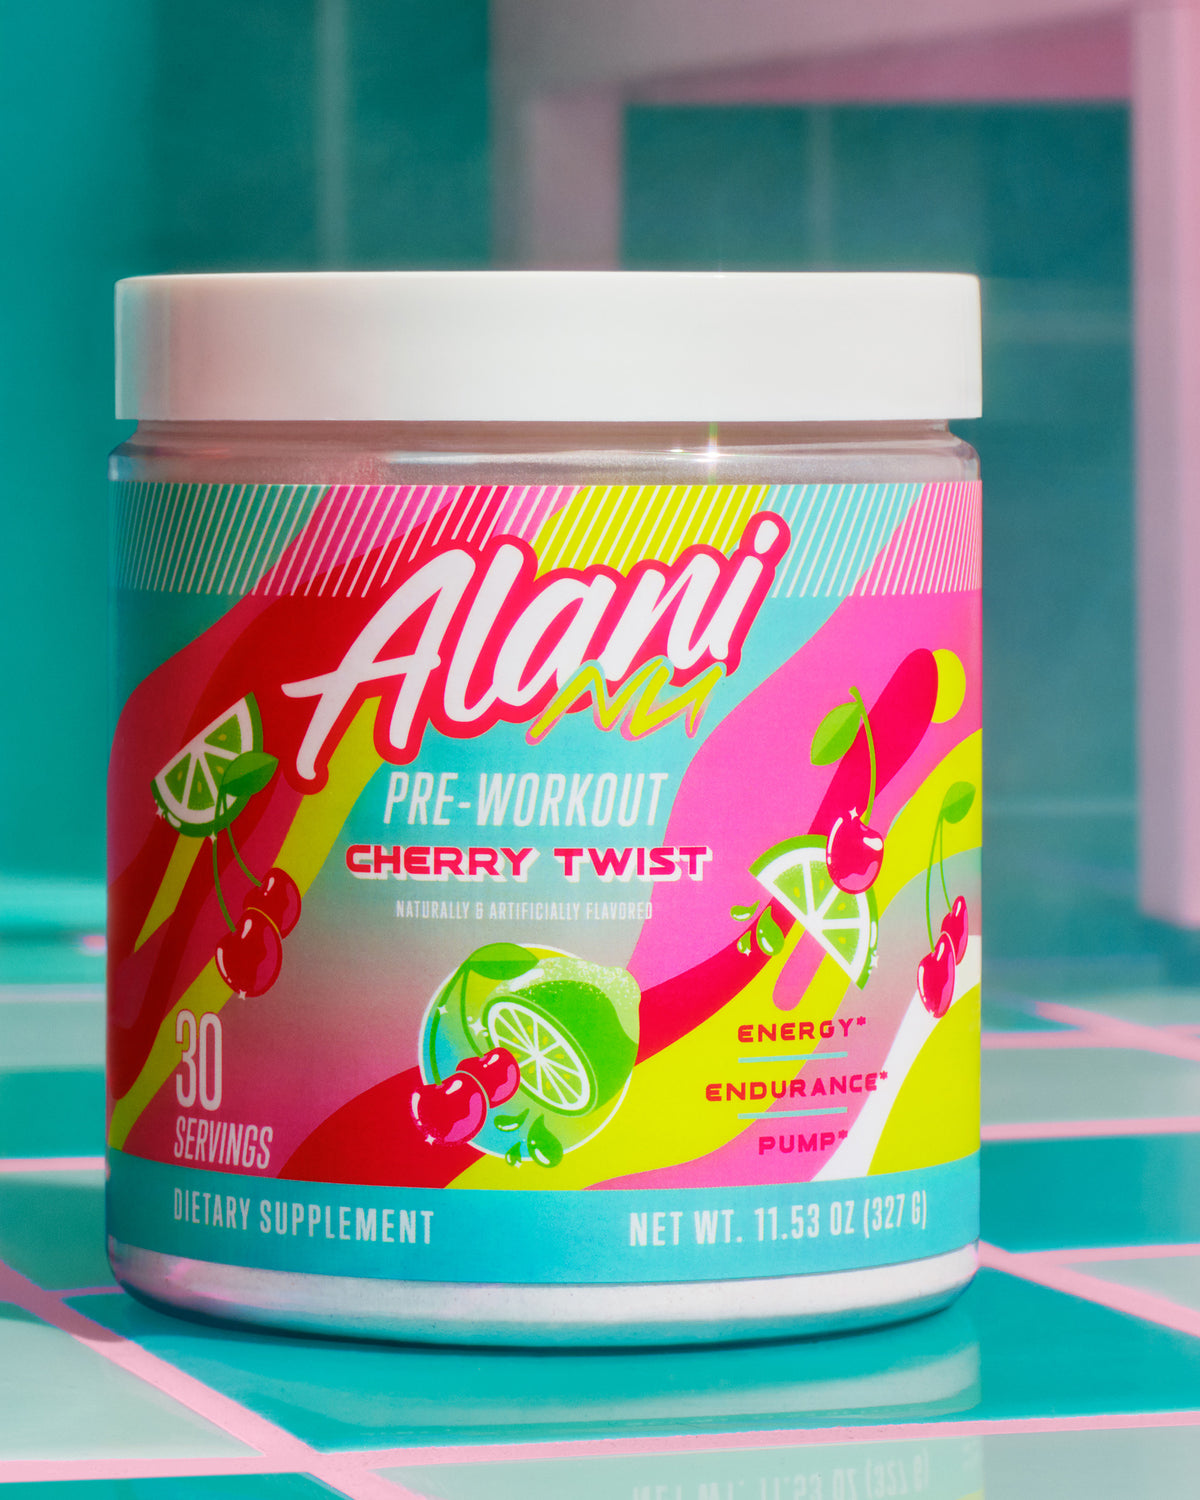  Alani Nu Pre-Workout in Cherry Twist flavor sits on a checkered teal and white surface.